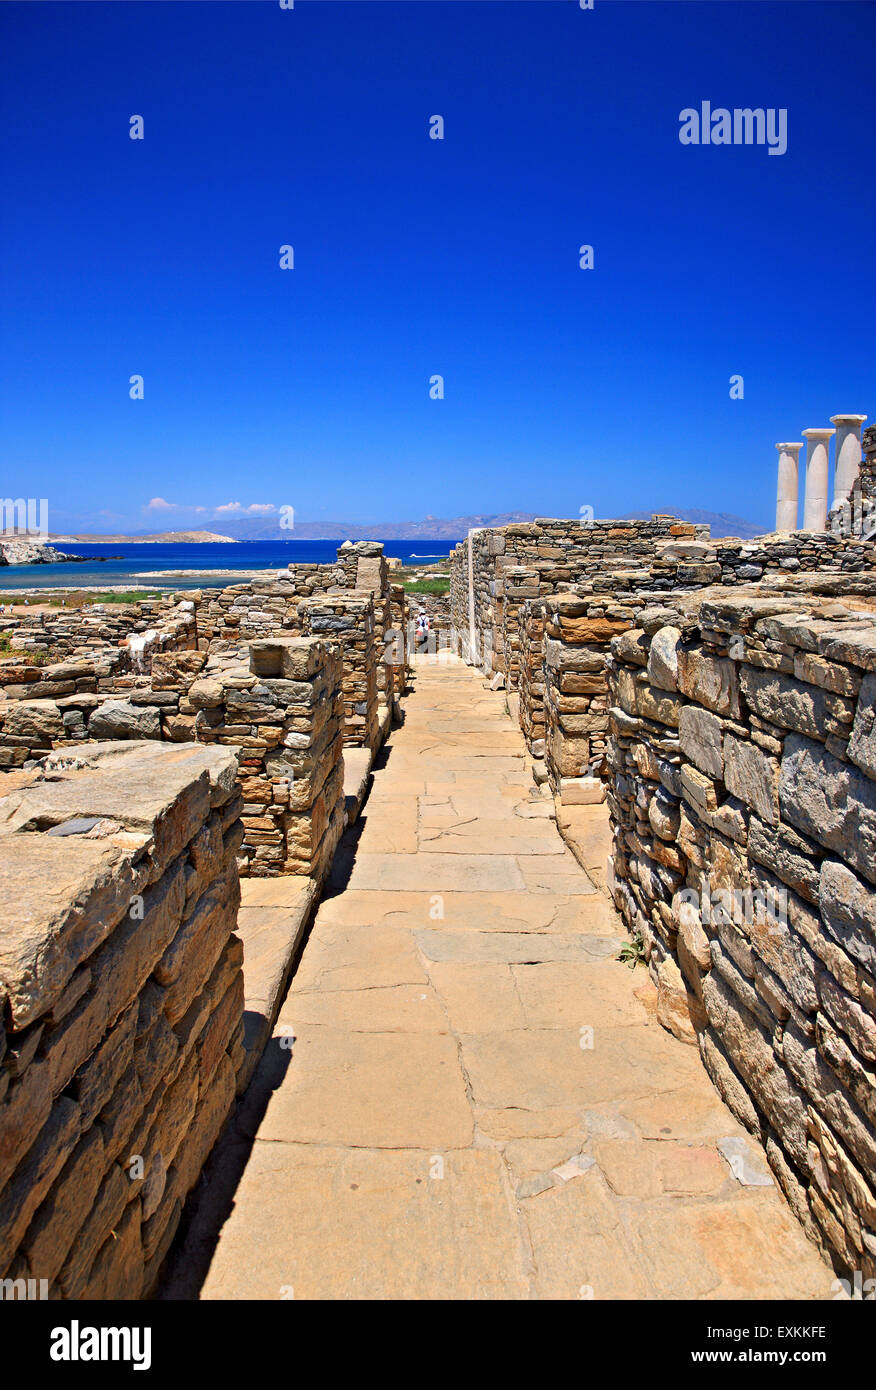 Walking around the ancient town in the archaeological site of the 'sacred' island of Delos. Cyclades, Greece. Stock Photo